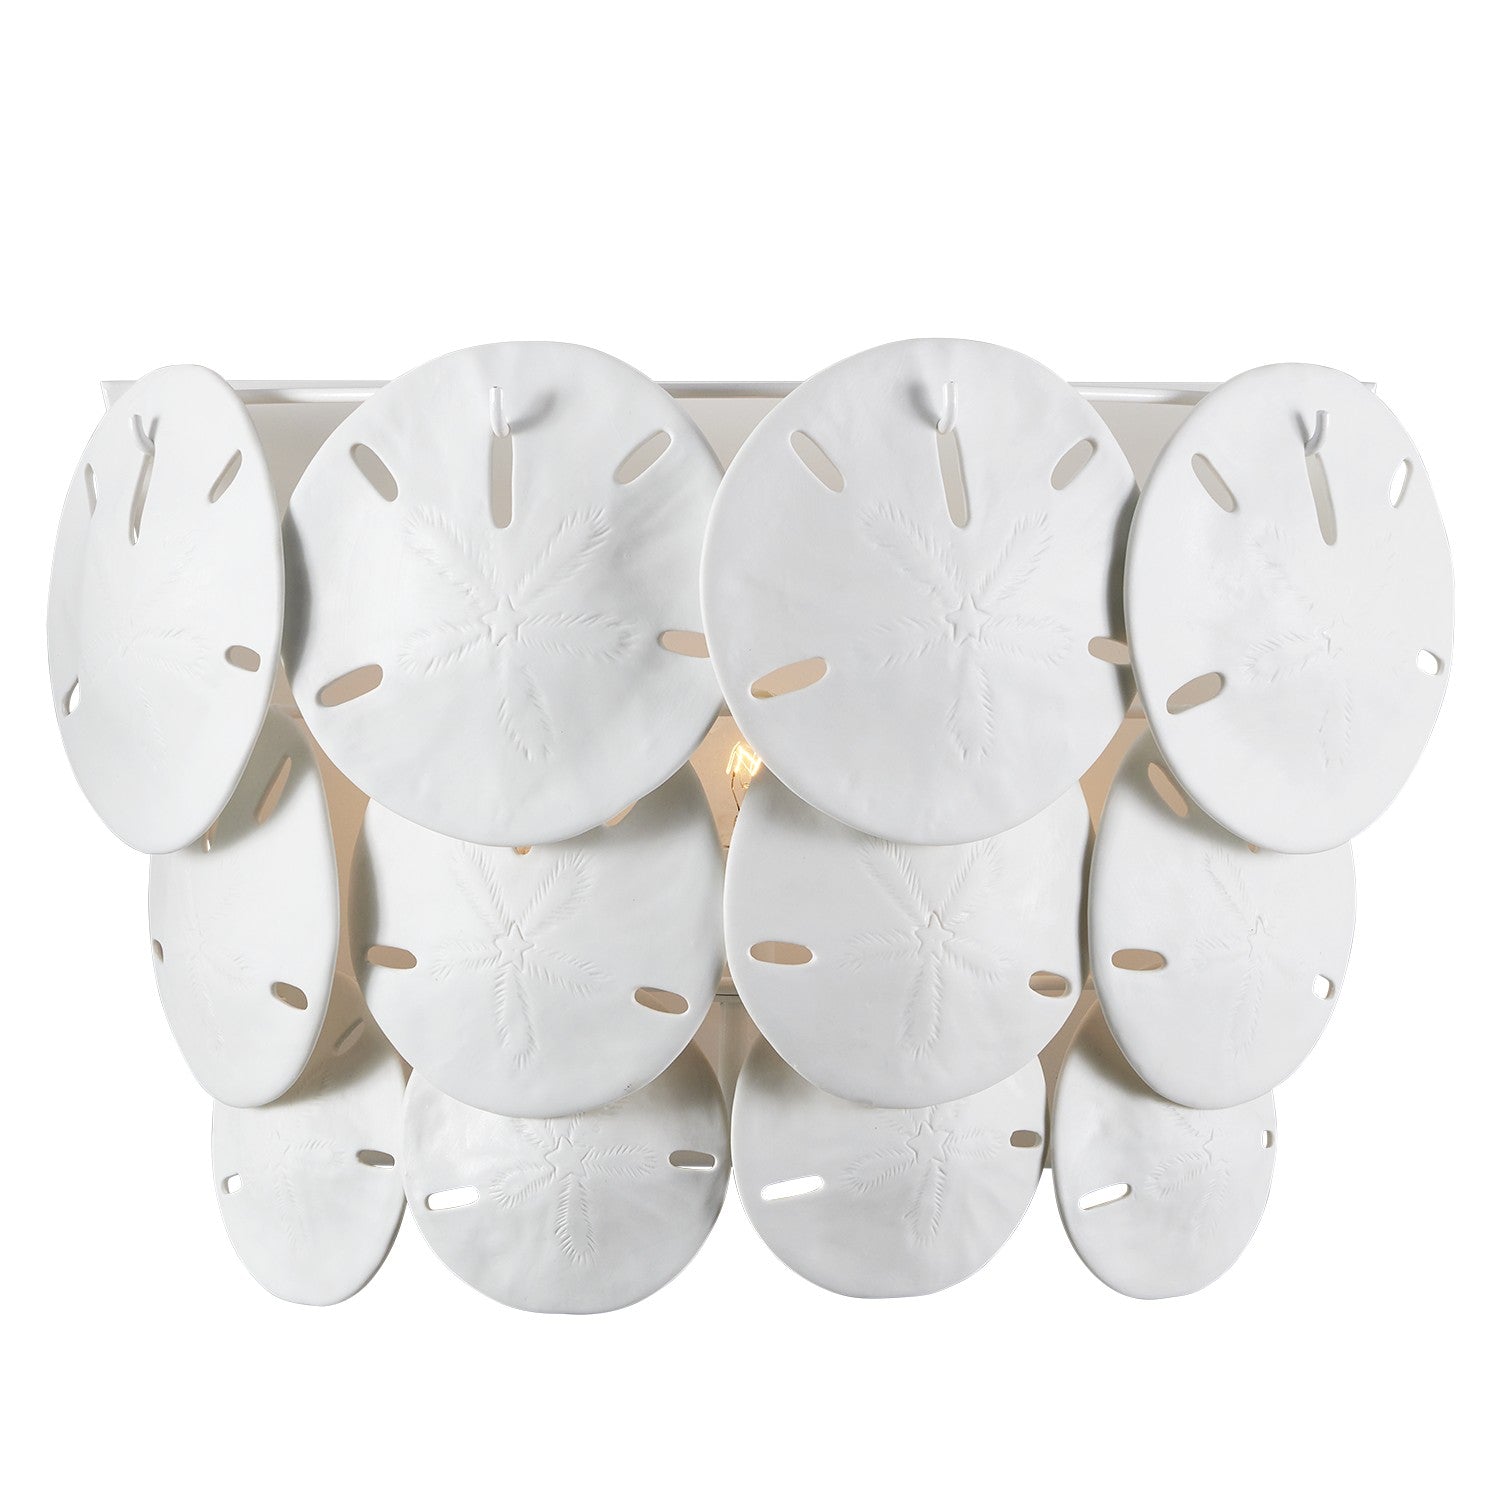 Currey and Company - Three Light Wall Sconce - Marjorie Skouras - Sugar White/White- Union Lighting Luminaires Decor